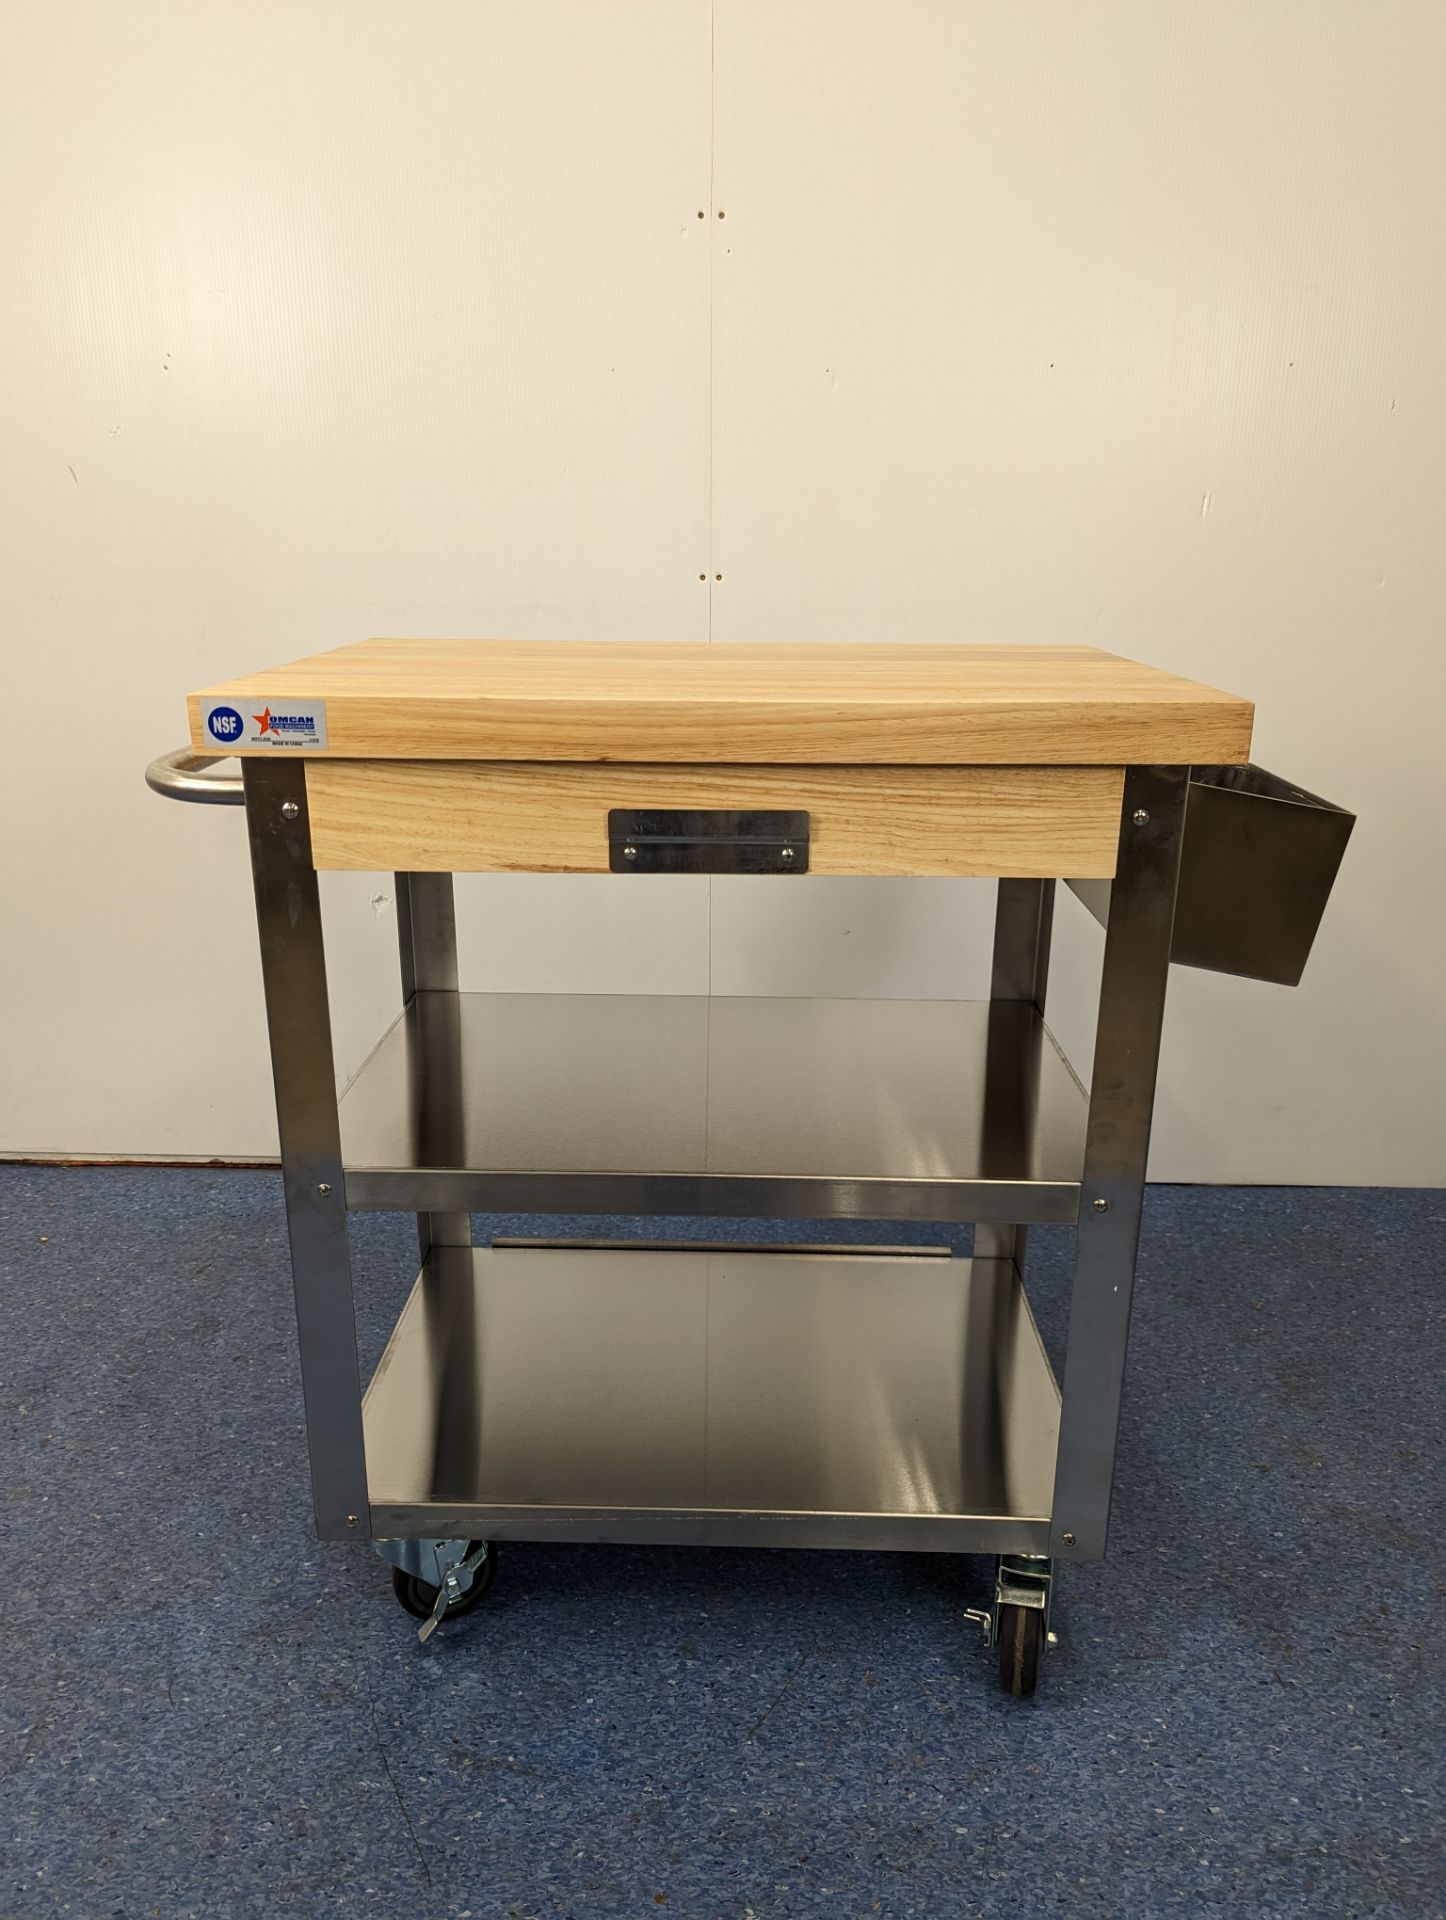 MOBILE FOOD PREPARATION TABLE/CART, OMCAN 41516 - Image 2 of 6